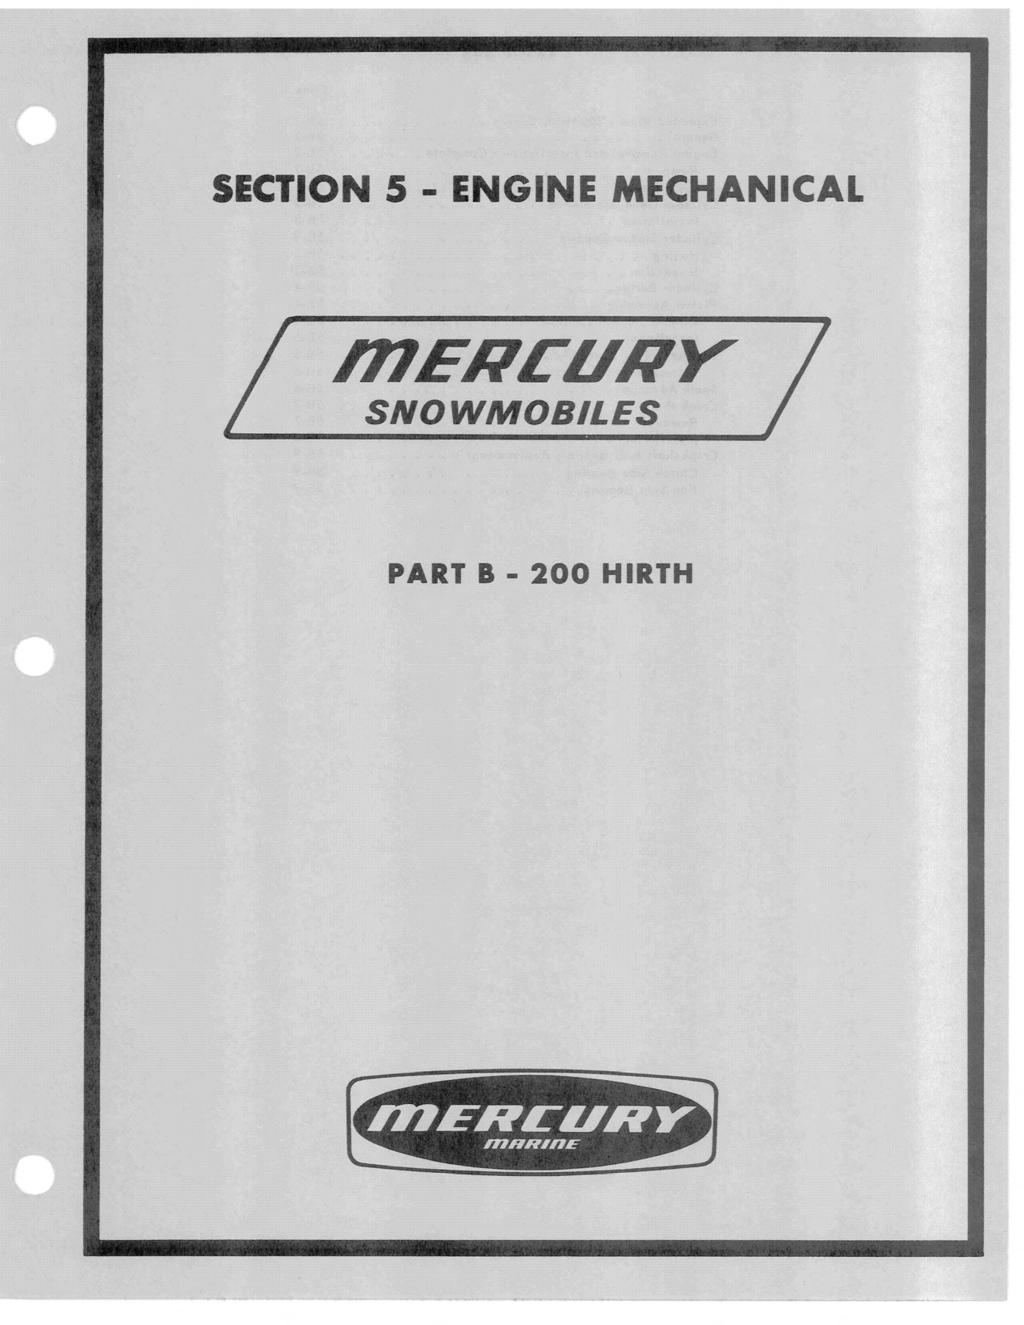 SECTION 5 - ENGINE MECHANICAL R1ENCUNY